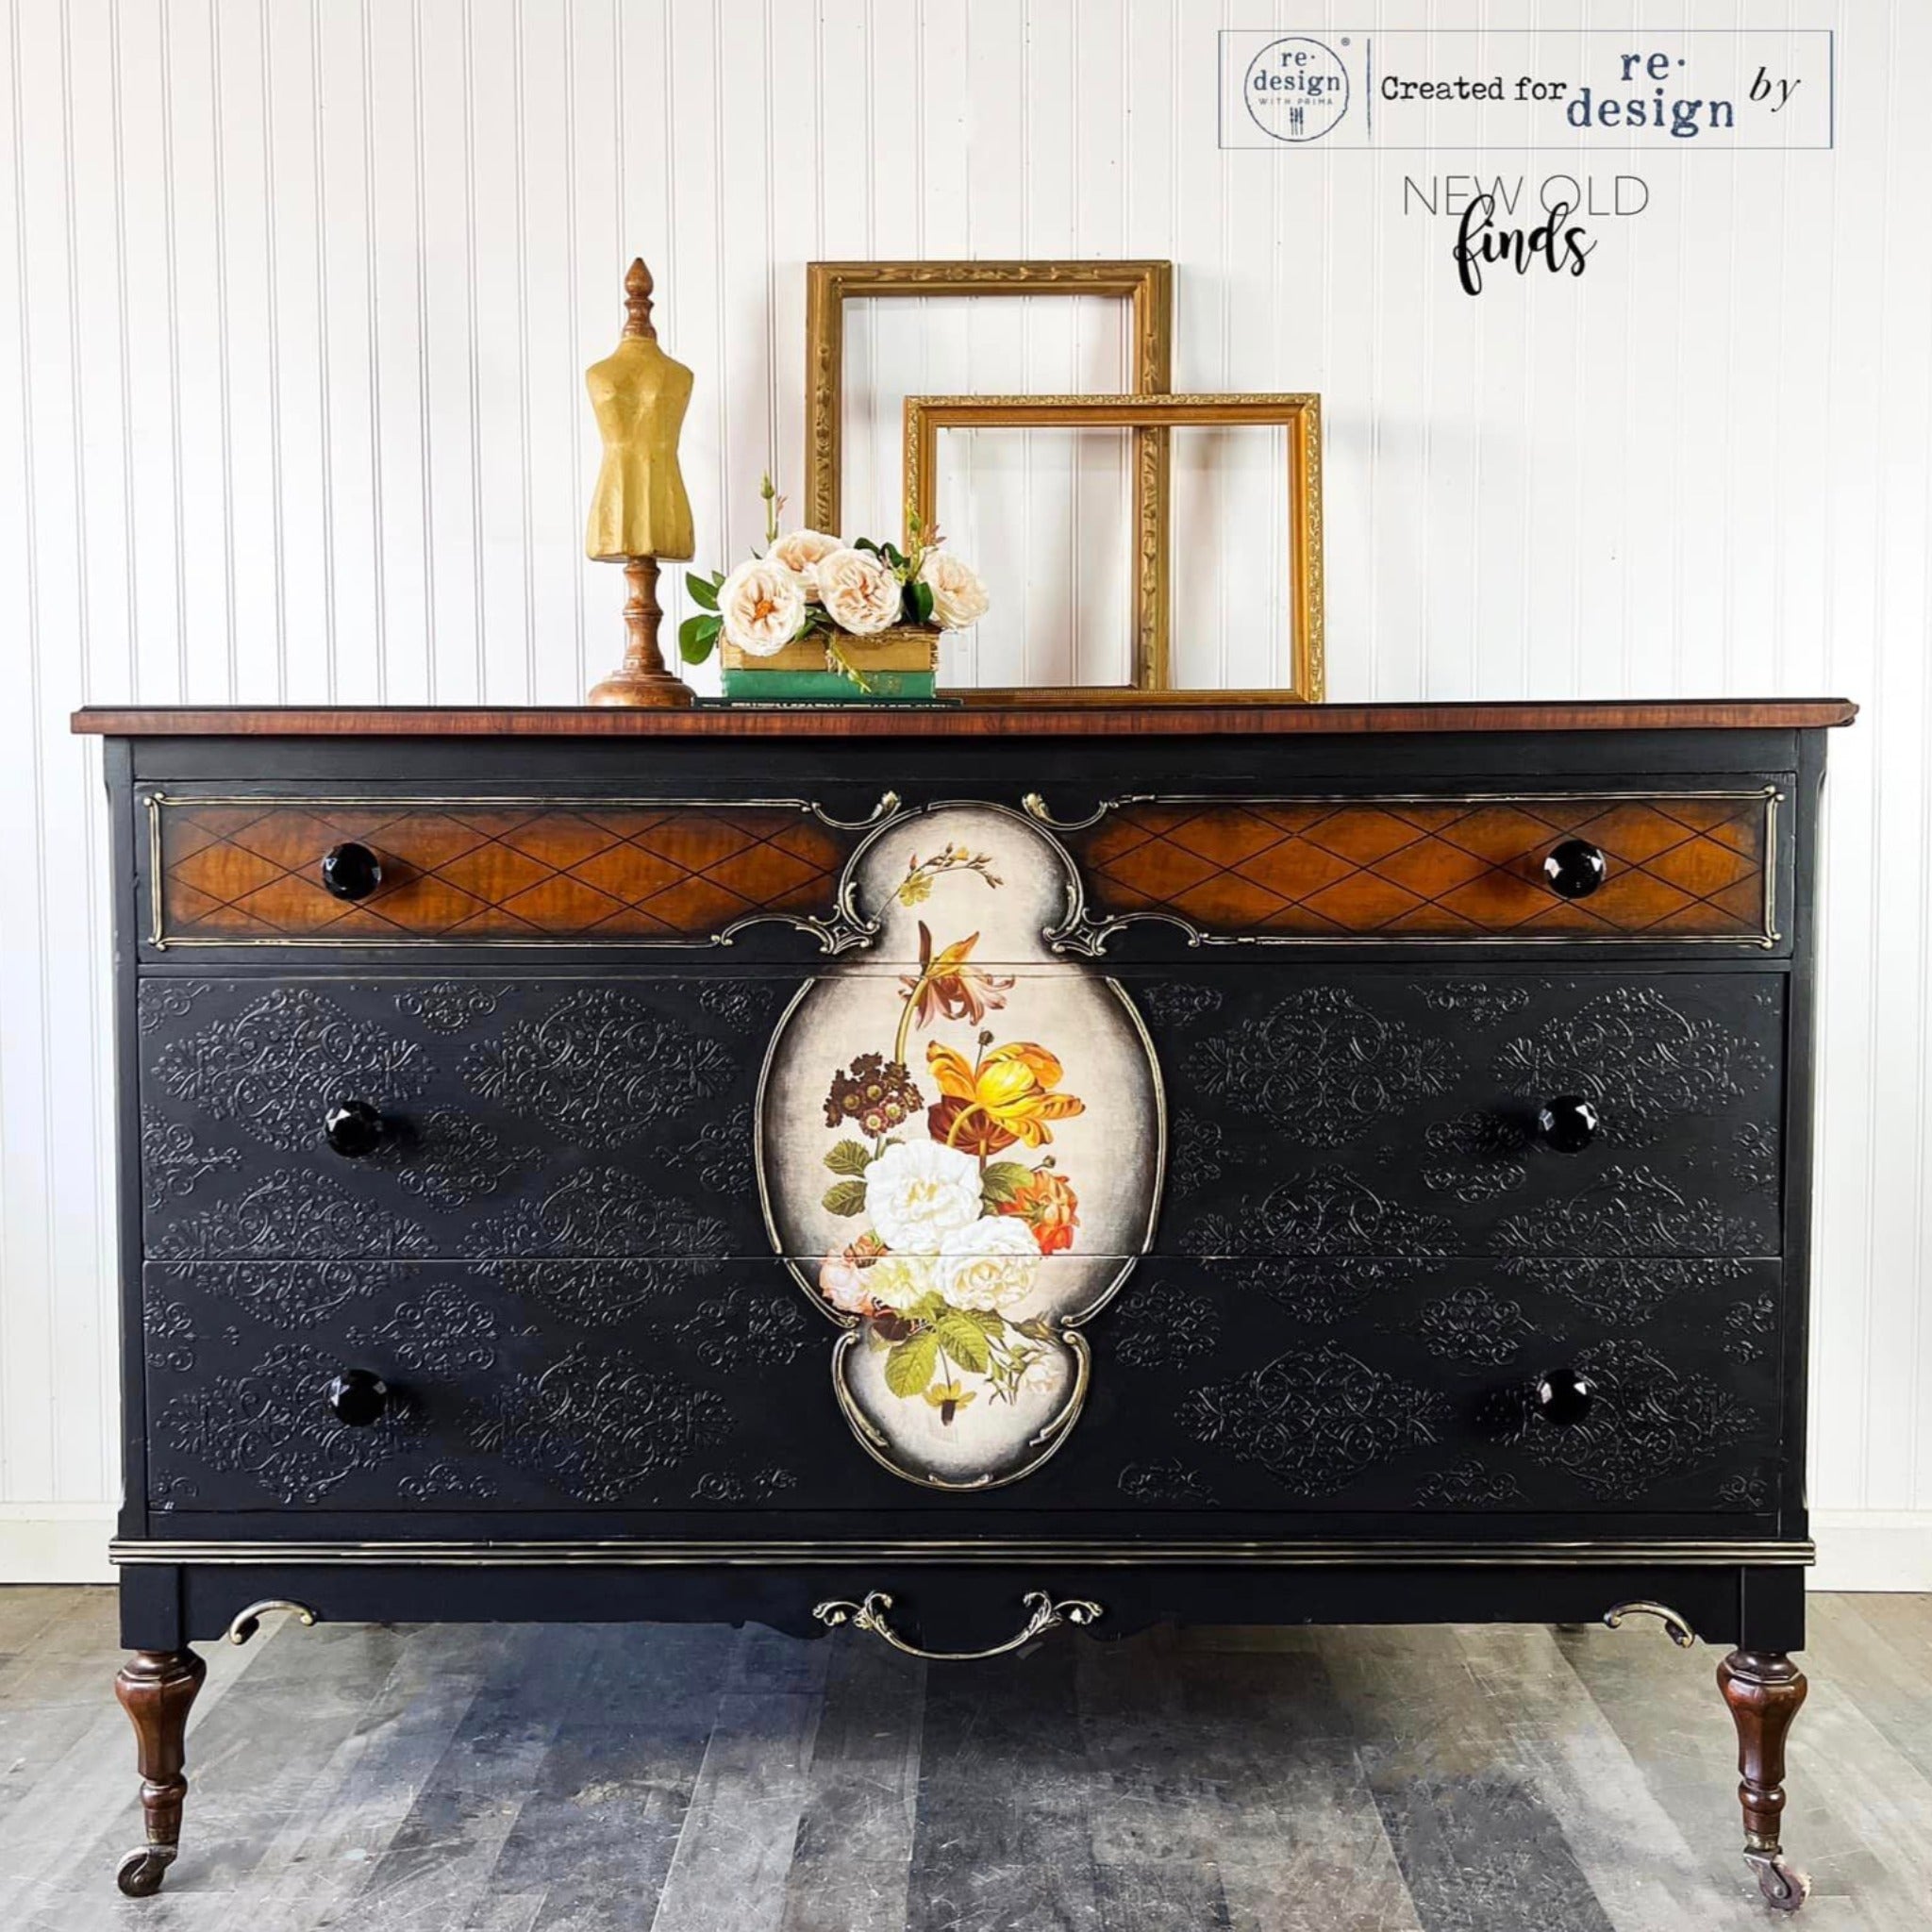 A large vintage dresser refurbished by New Old Finds is painted black with natural wood accents and features ReDesign with Prima's Blossomed Beauties small transfer inside a center frame against a light beige background on the front center of the dresser.